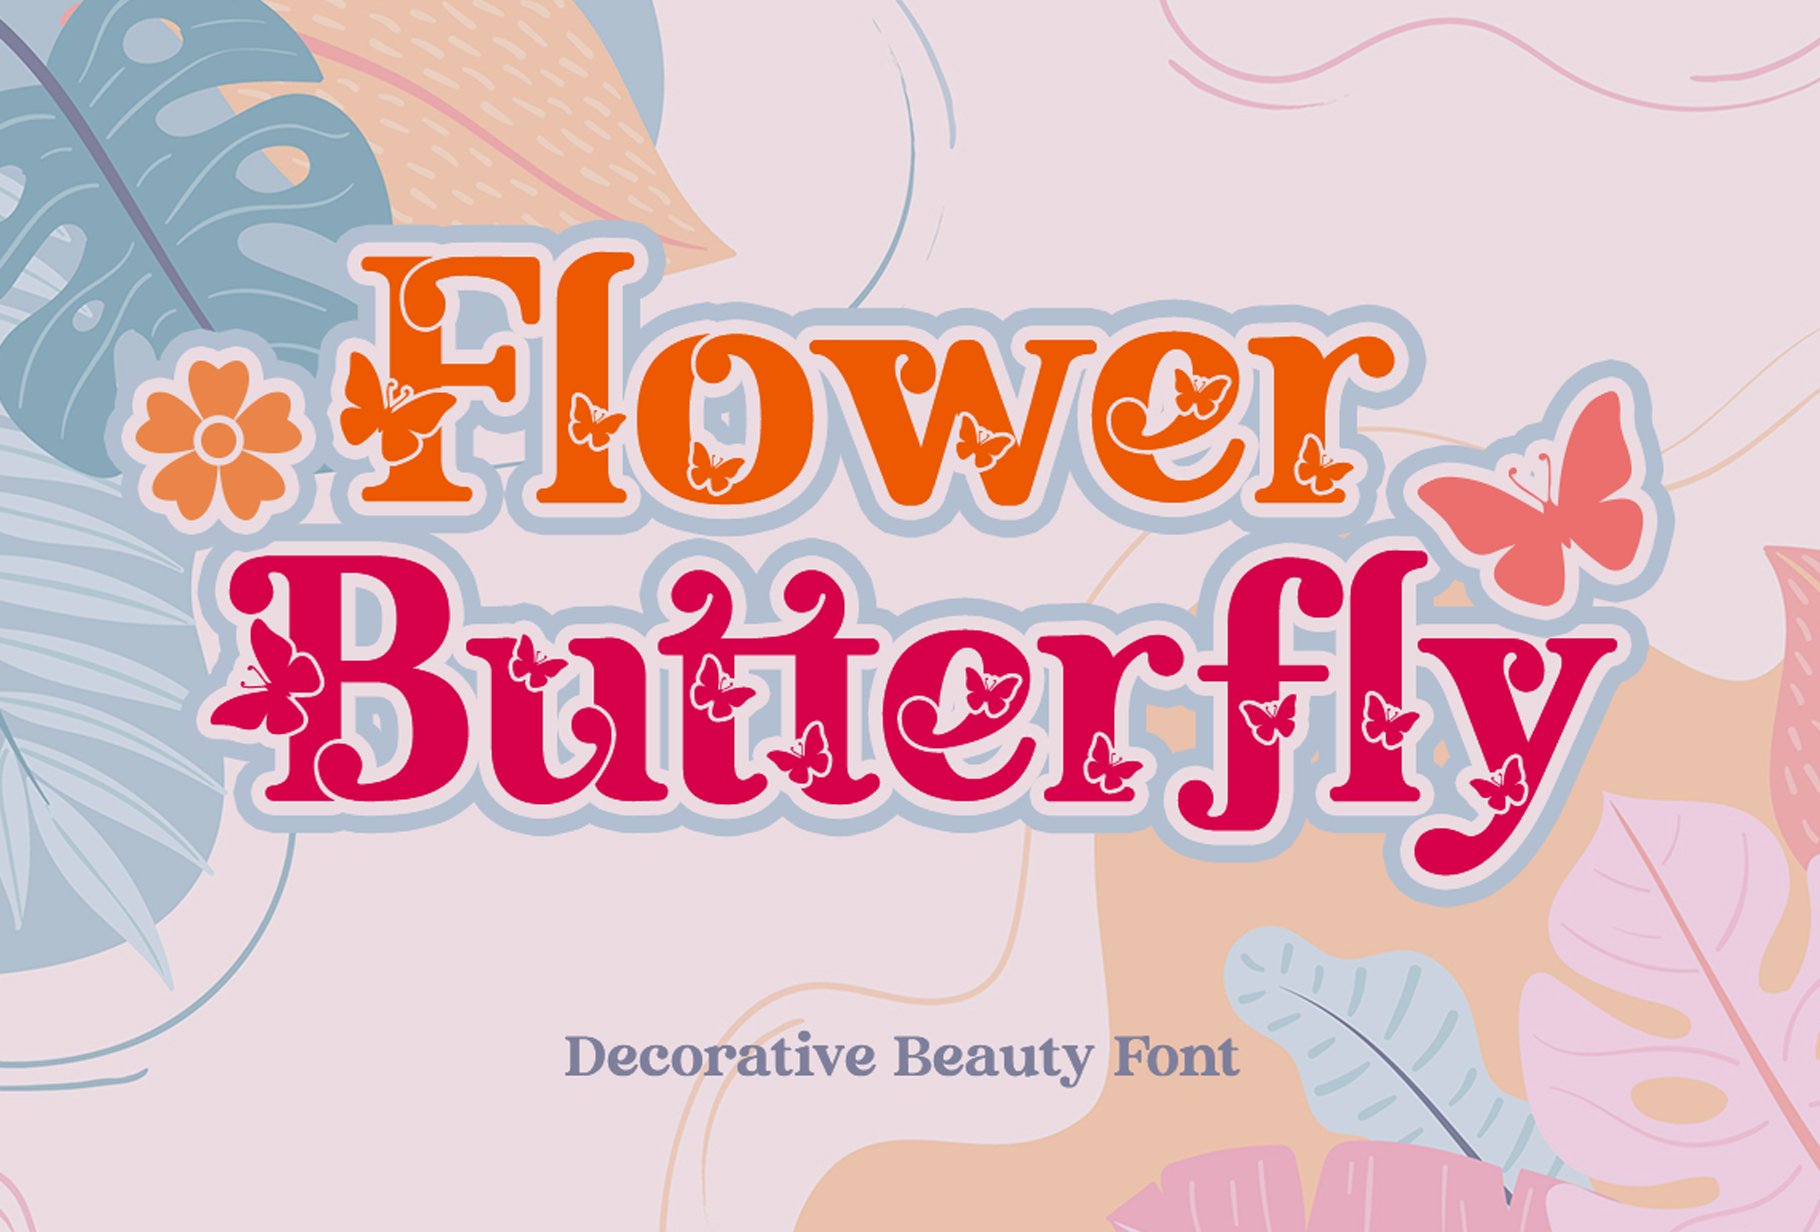 Flower Butterfly | Beauty Font cover image.